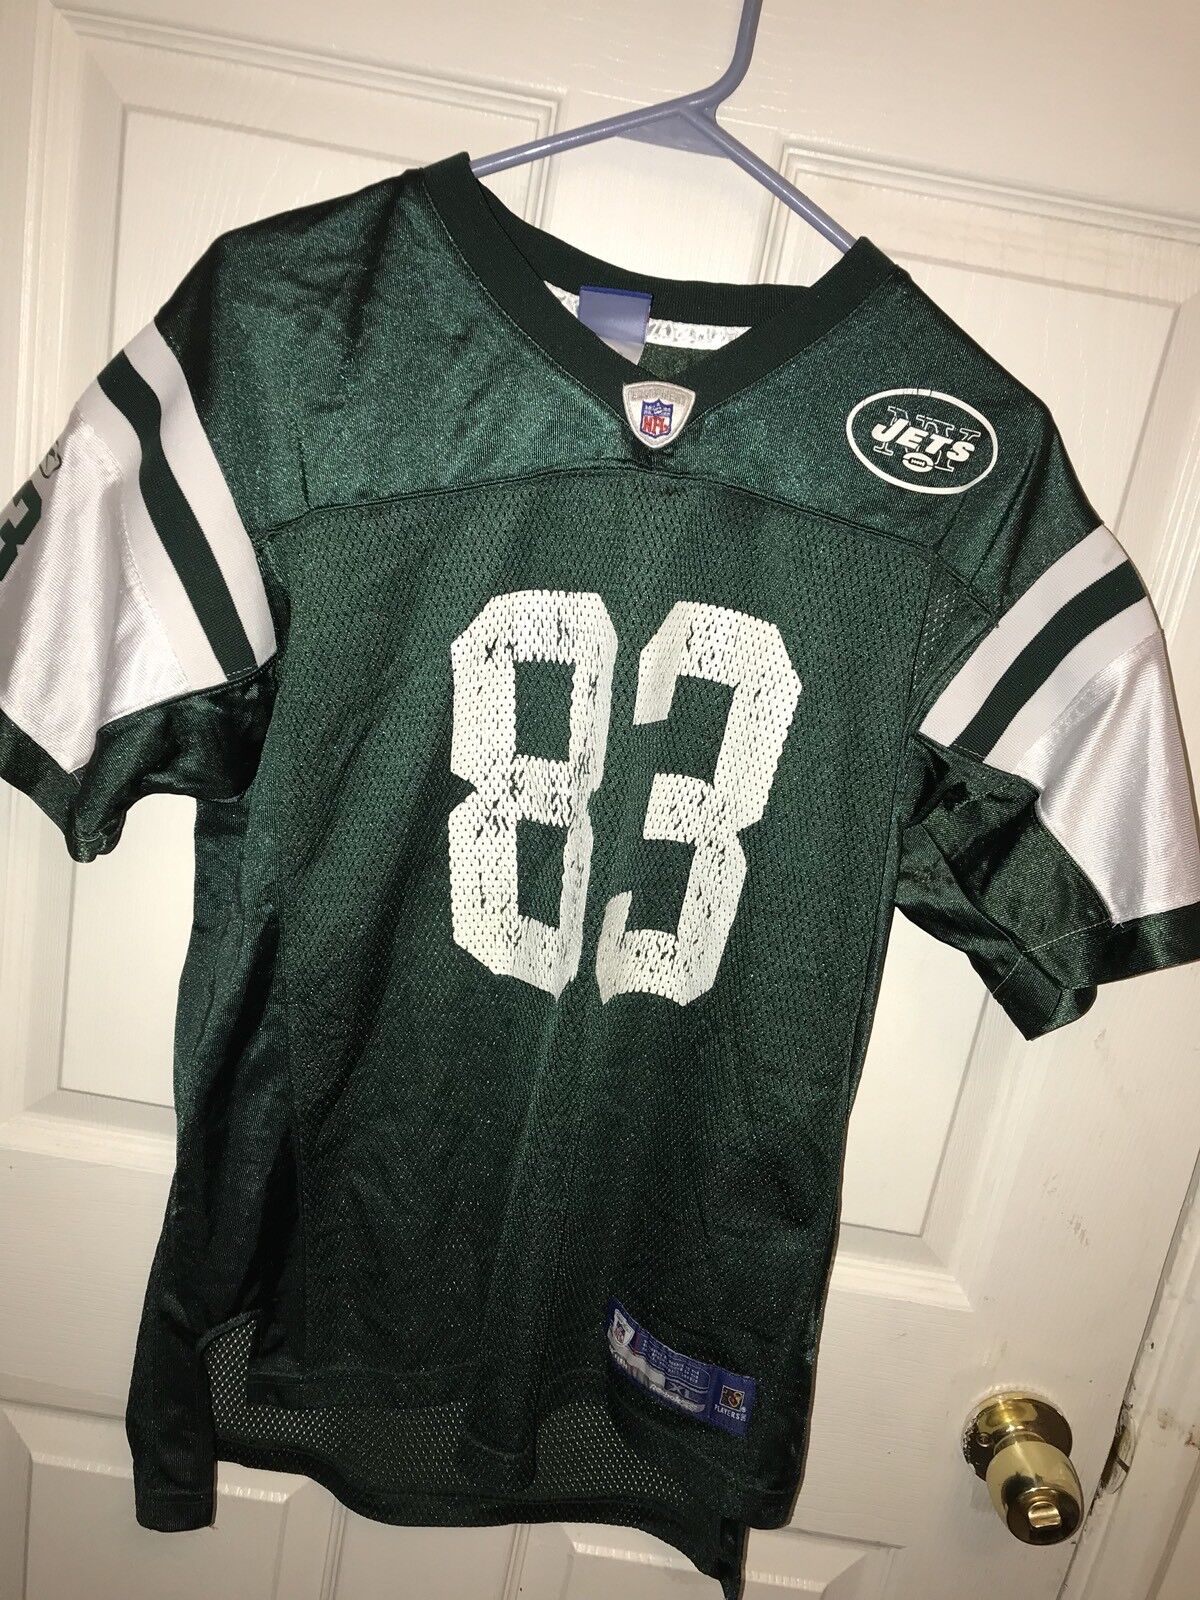 NEW YORK JETS #83 MOSS NFL FOOTBALL JERSEY YOUTH XL 18-20